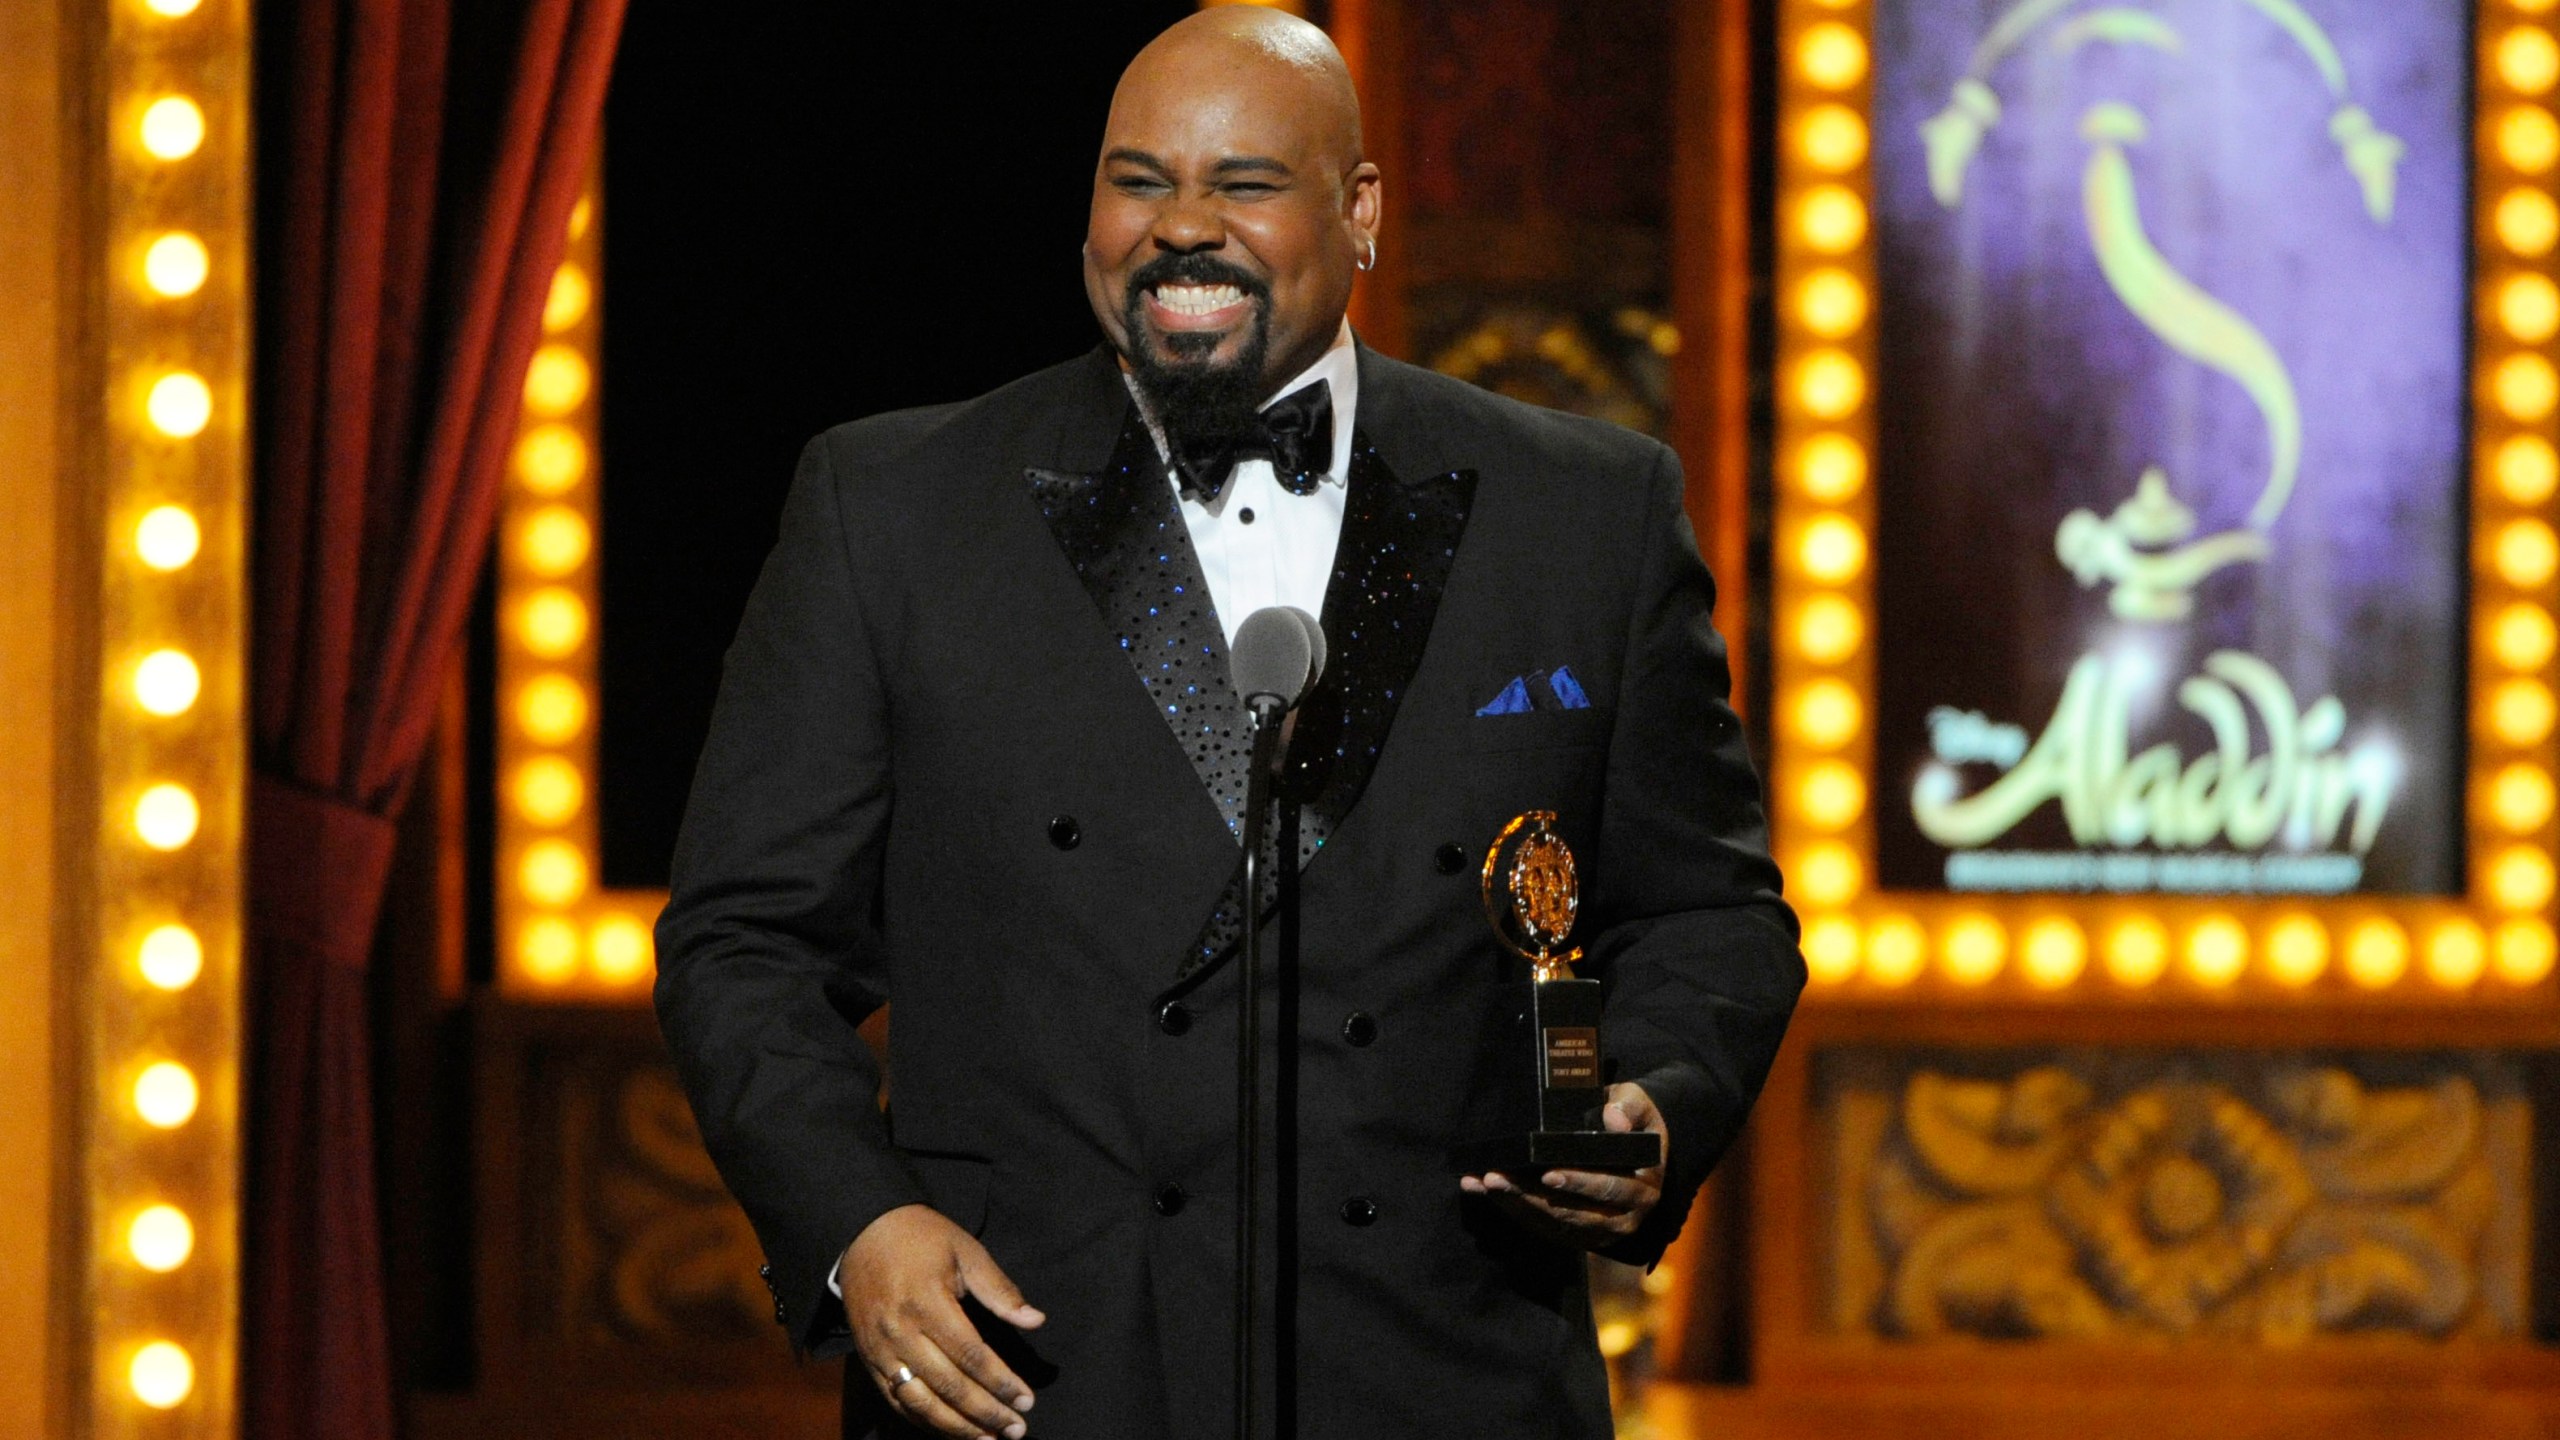 FILE - James Monroe Iglehart accepts the award for best performance by an actor in a featured role in a musical for "Aladdin" on stage at the 68th annual Tony Awards at Radio City Music Hall on Sunday, June 8, 2014, in New York. (Photo by Evan Agostini/Invision/AP, File)